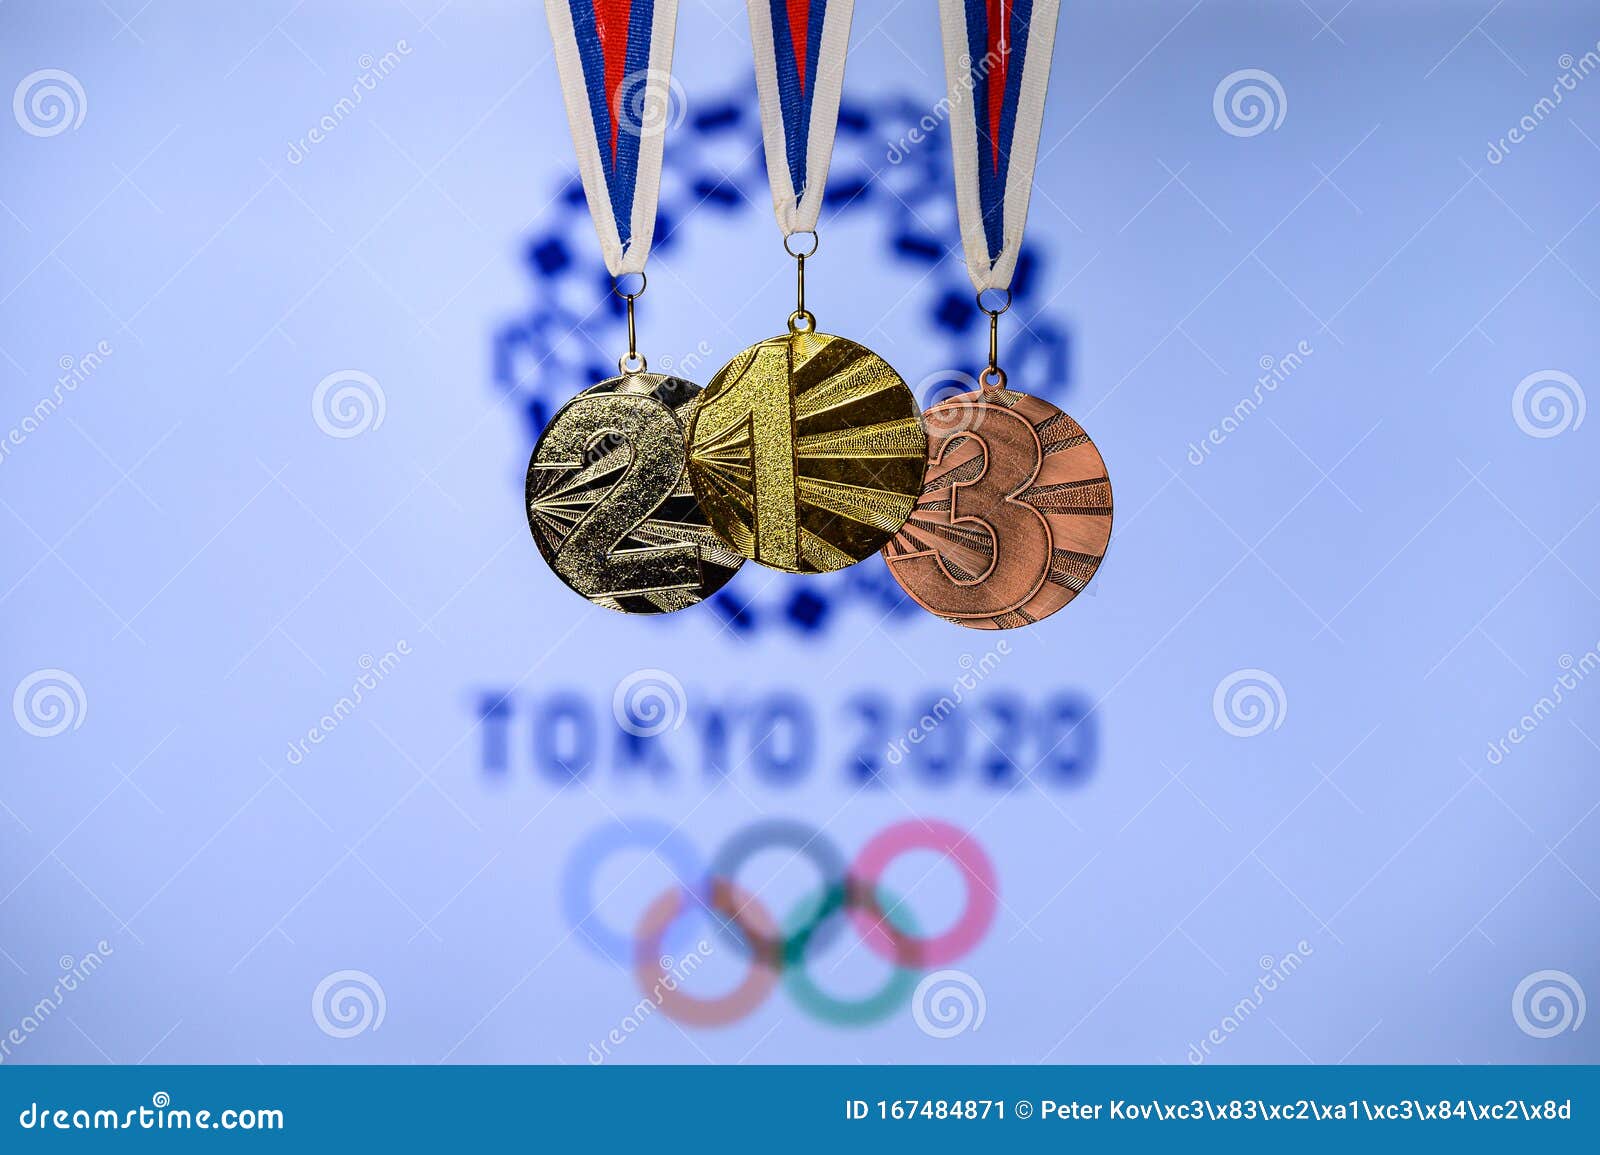 Medals tokyo 2020 olympic games Plastic podiums,